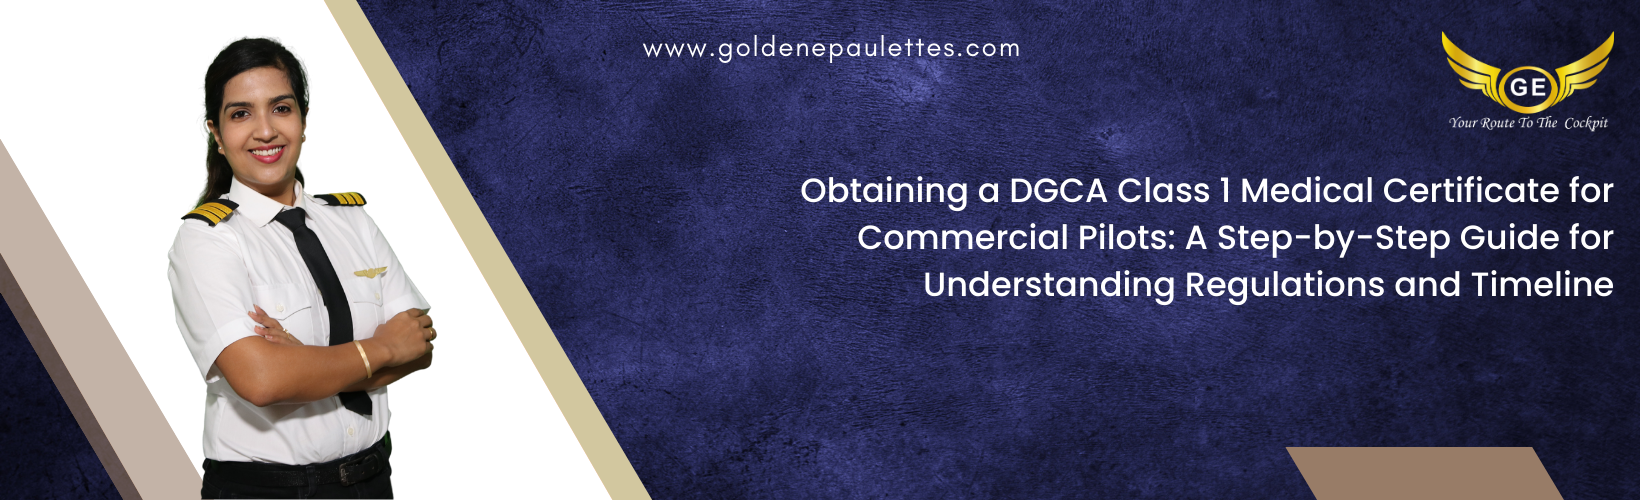 Understanding the Regulations for Obtaining a DGCA Class 1 Medical Certificate for Commercial Pilots